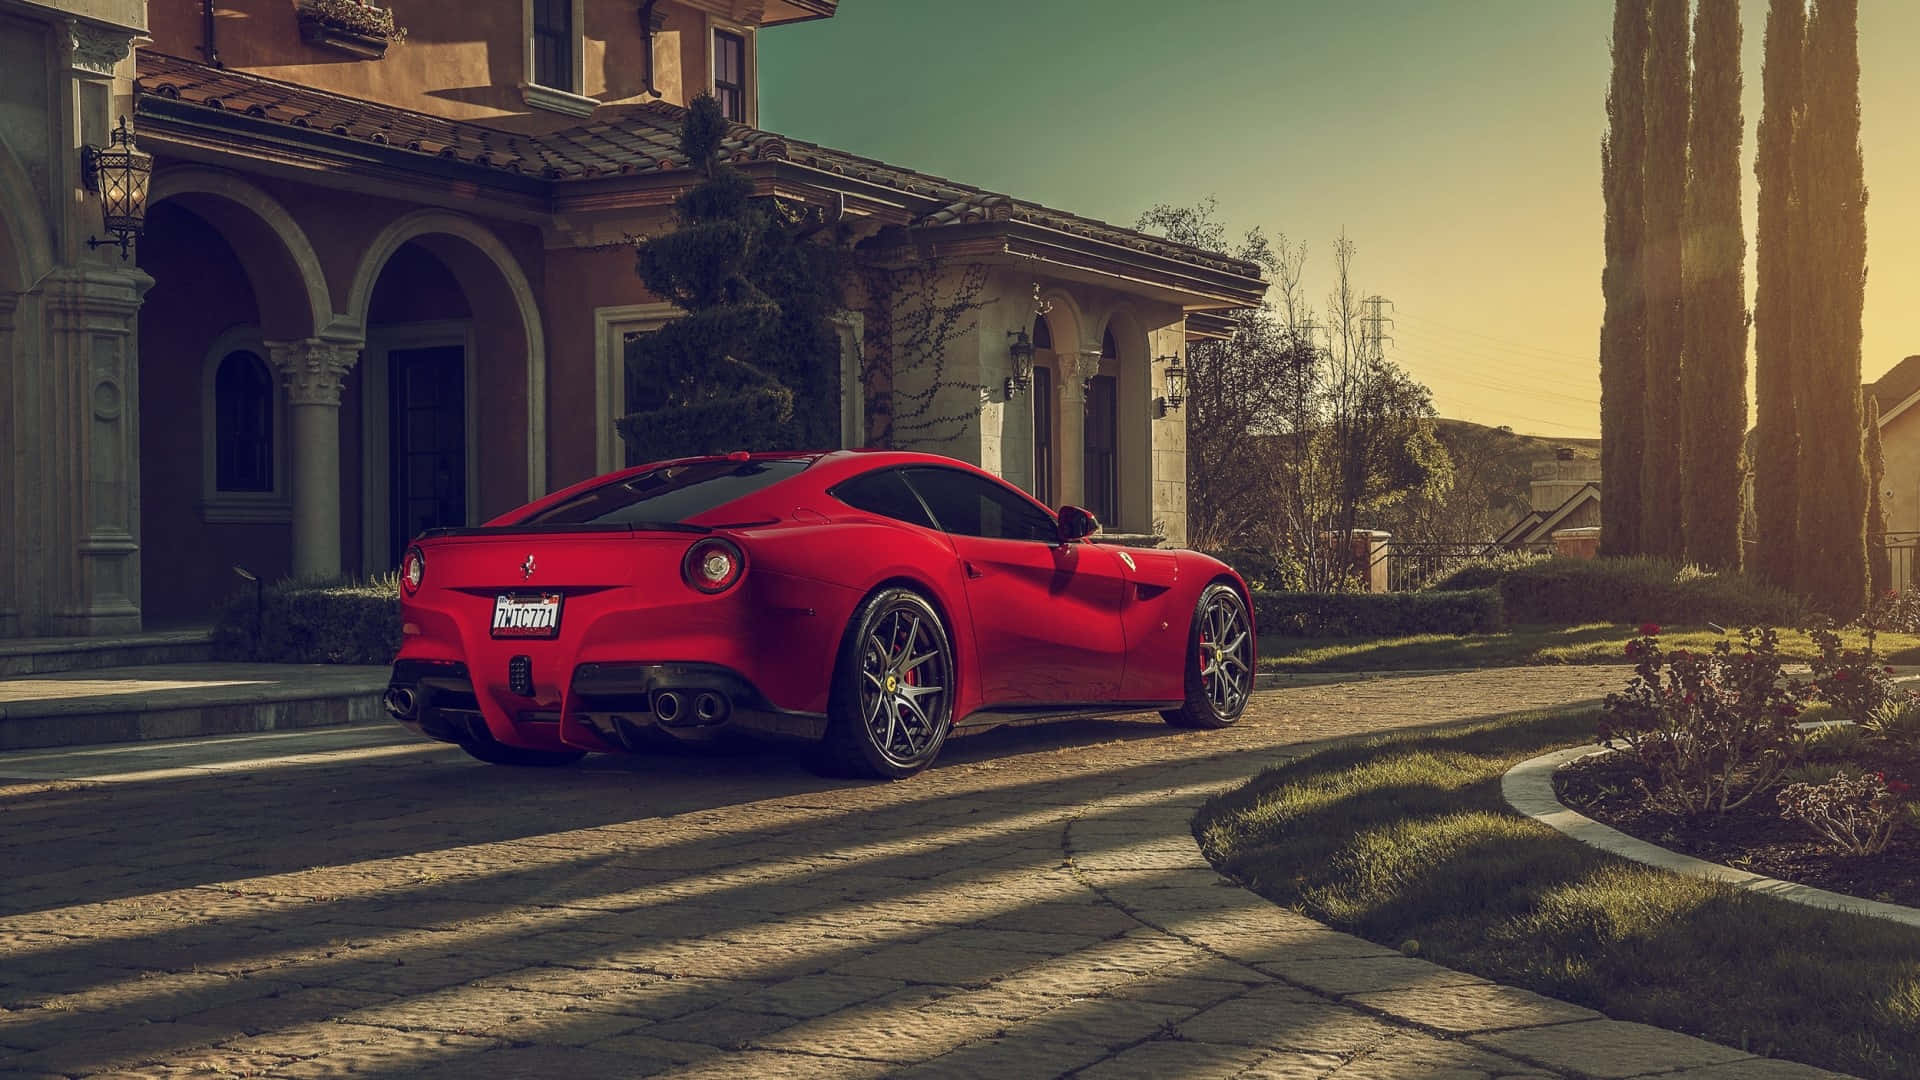 Experience the Power and Elegance of the Ferrari F12 Berlinetta Wallpaper